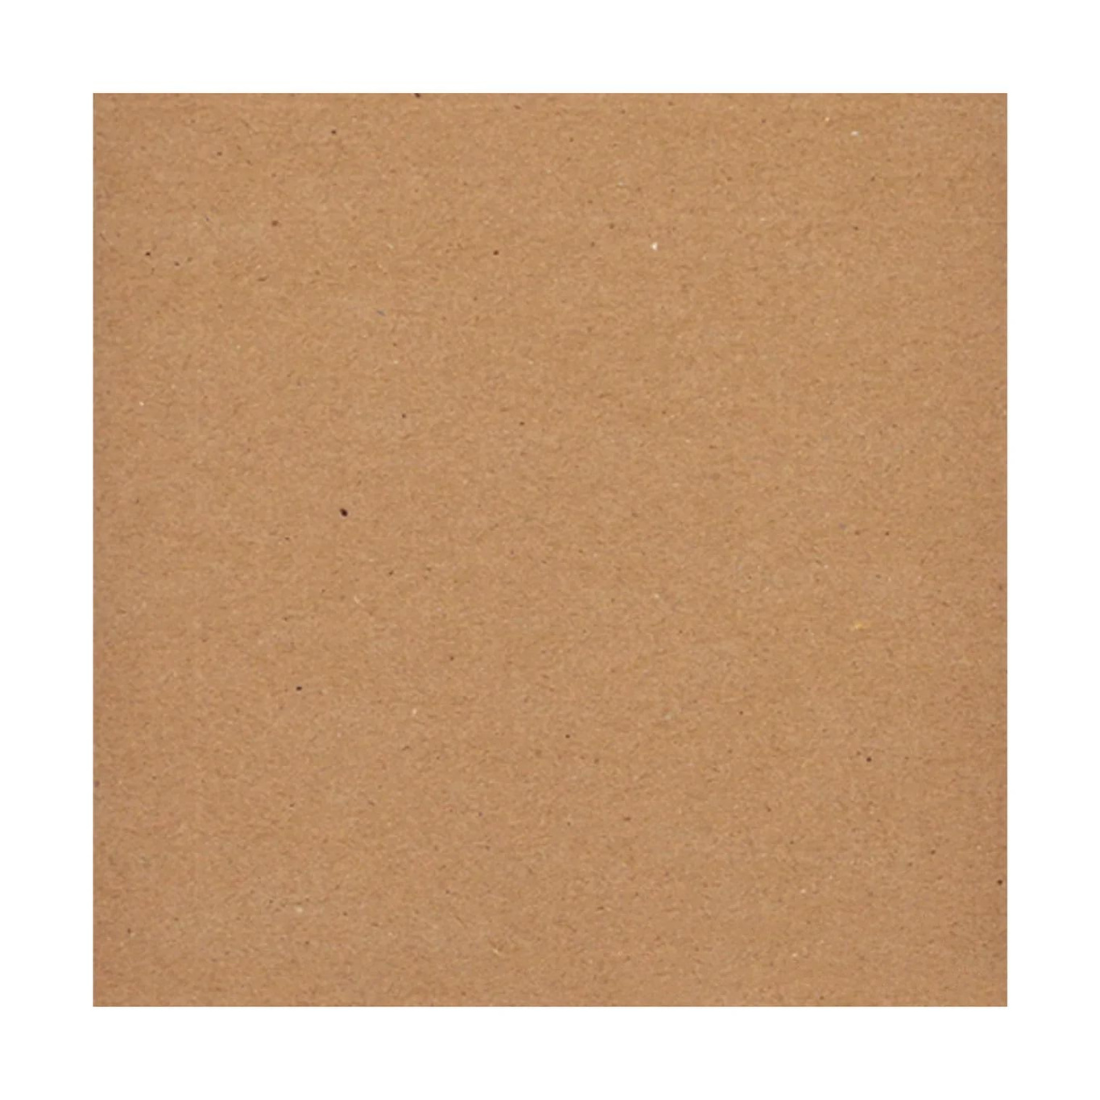 7" EP Stiffener - Add to your C-EP or F-EP (PACK OF 50)